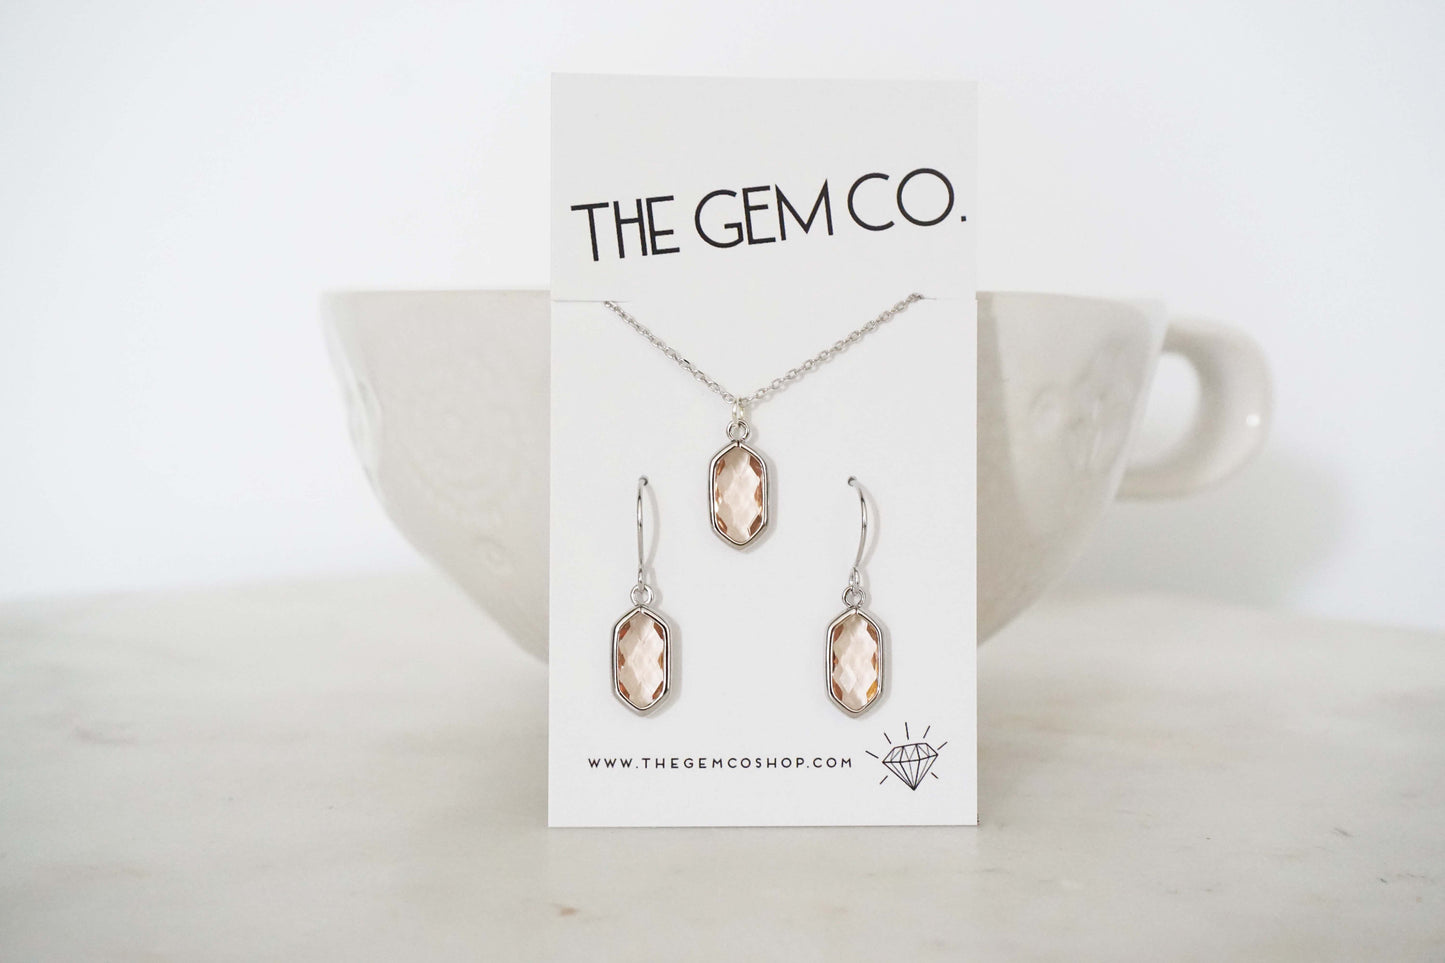 Champagne Gem Hexagon Earrings and Necklace Set | Bridesmaid Earrings | Wedding Jewelry | ENCHPG33, ENCHPS33